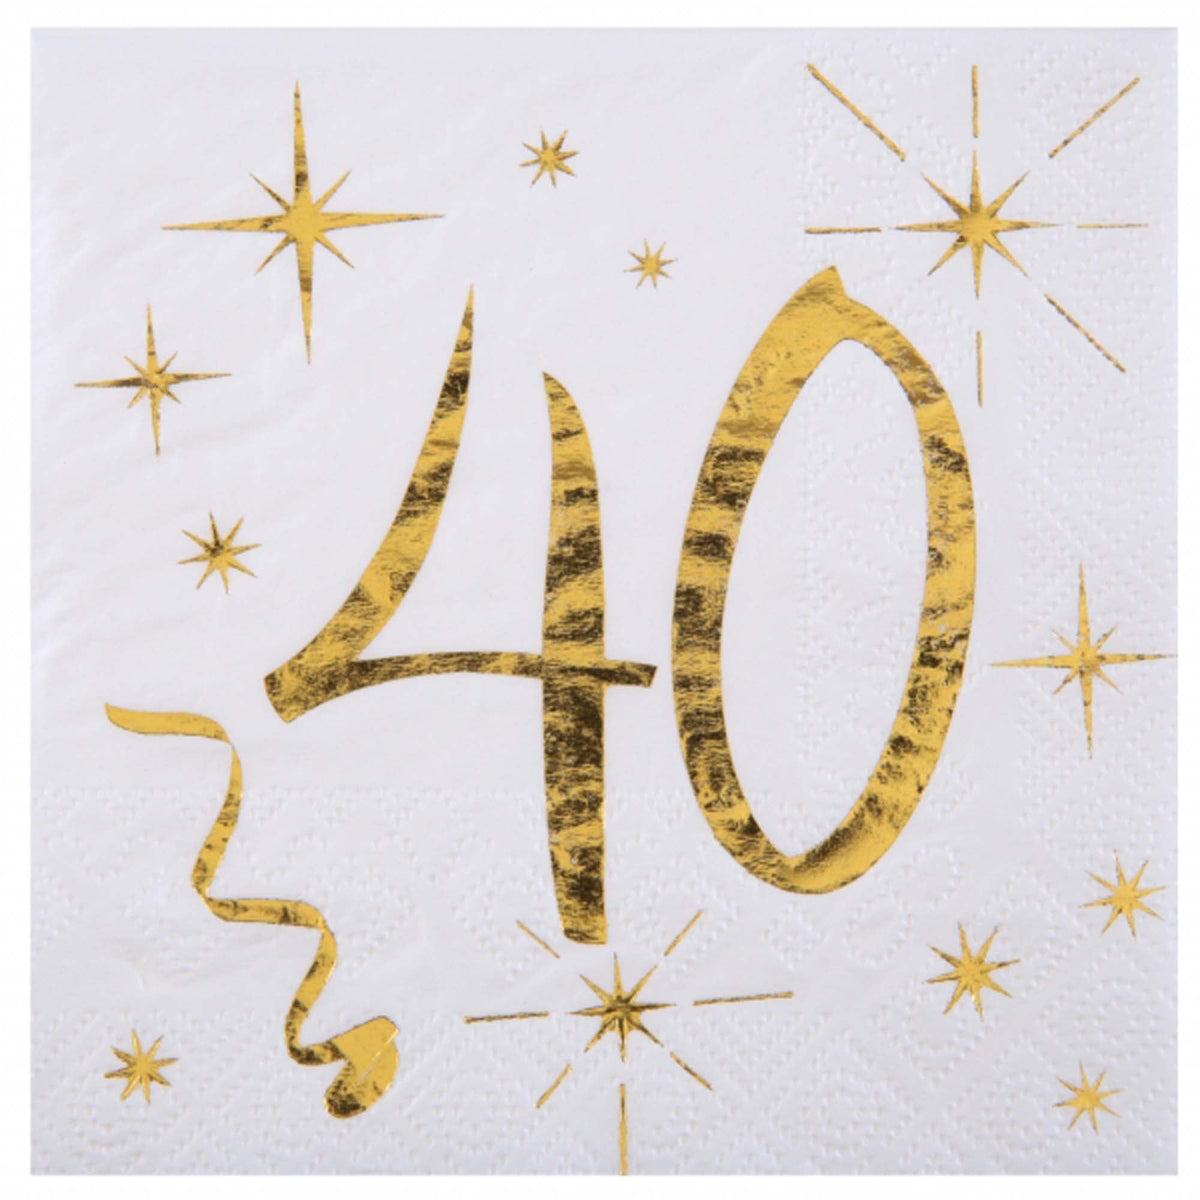 SANTEX General Birthday Starry Golden Age 40th Birthday Large Lunch Napkins, 20 Count 3660380040644